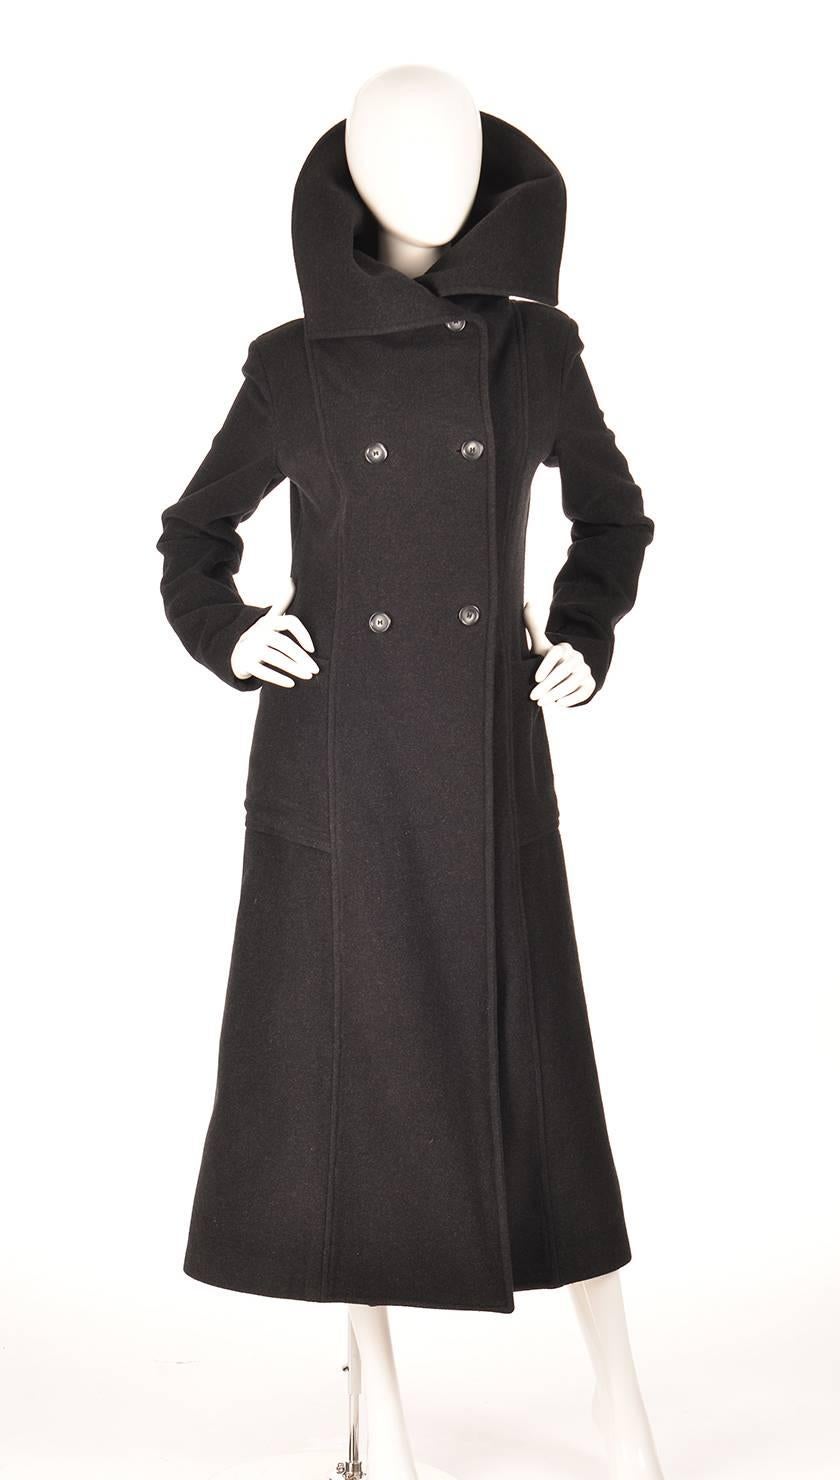 Vintage Ivan Grundahal Double Breasted Princess Seam Coat

Dramatic black double breasted princess seam coat by Ivan Grundahal. The coat features a fold-able, large stand collar to help keep you warm and fabulous on those cold, windy days. Two